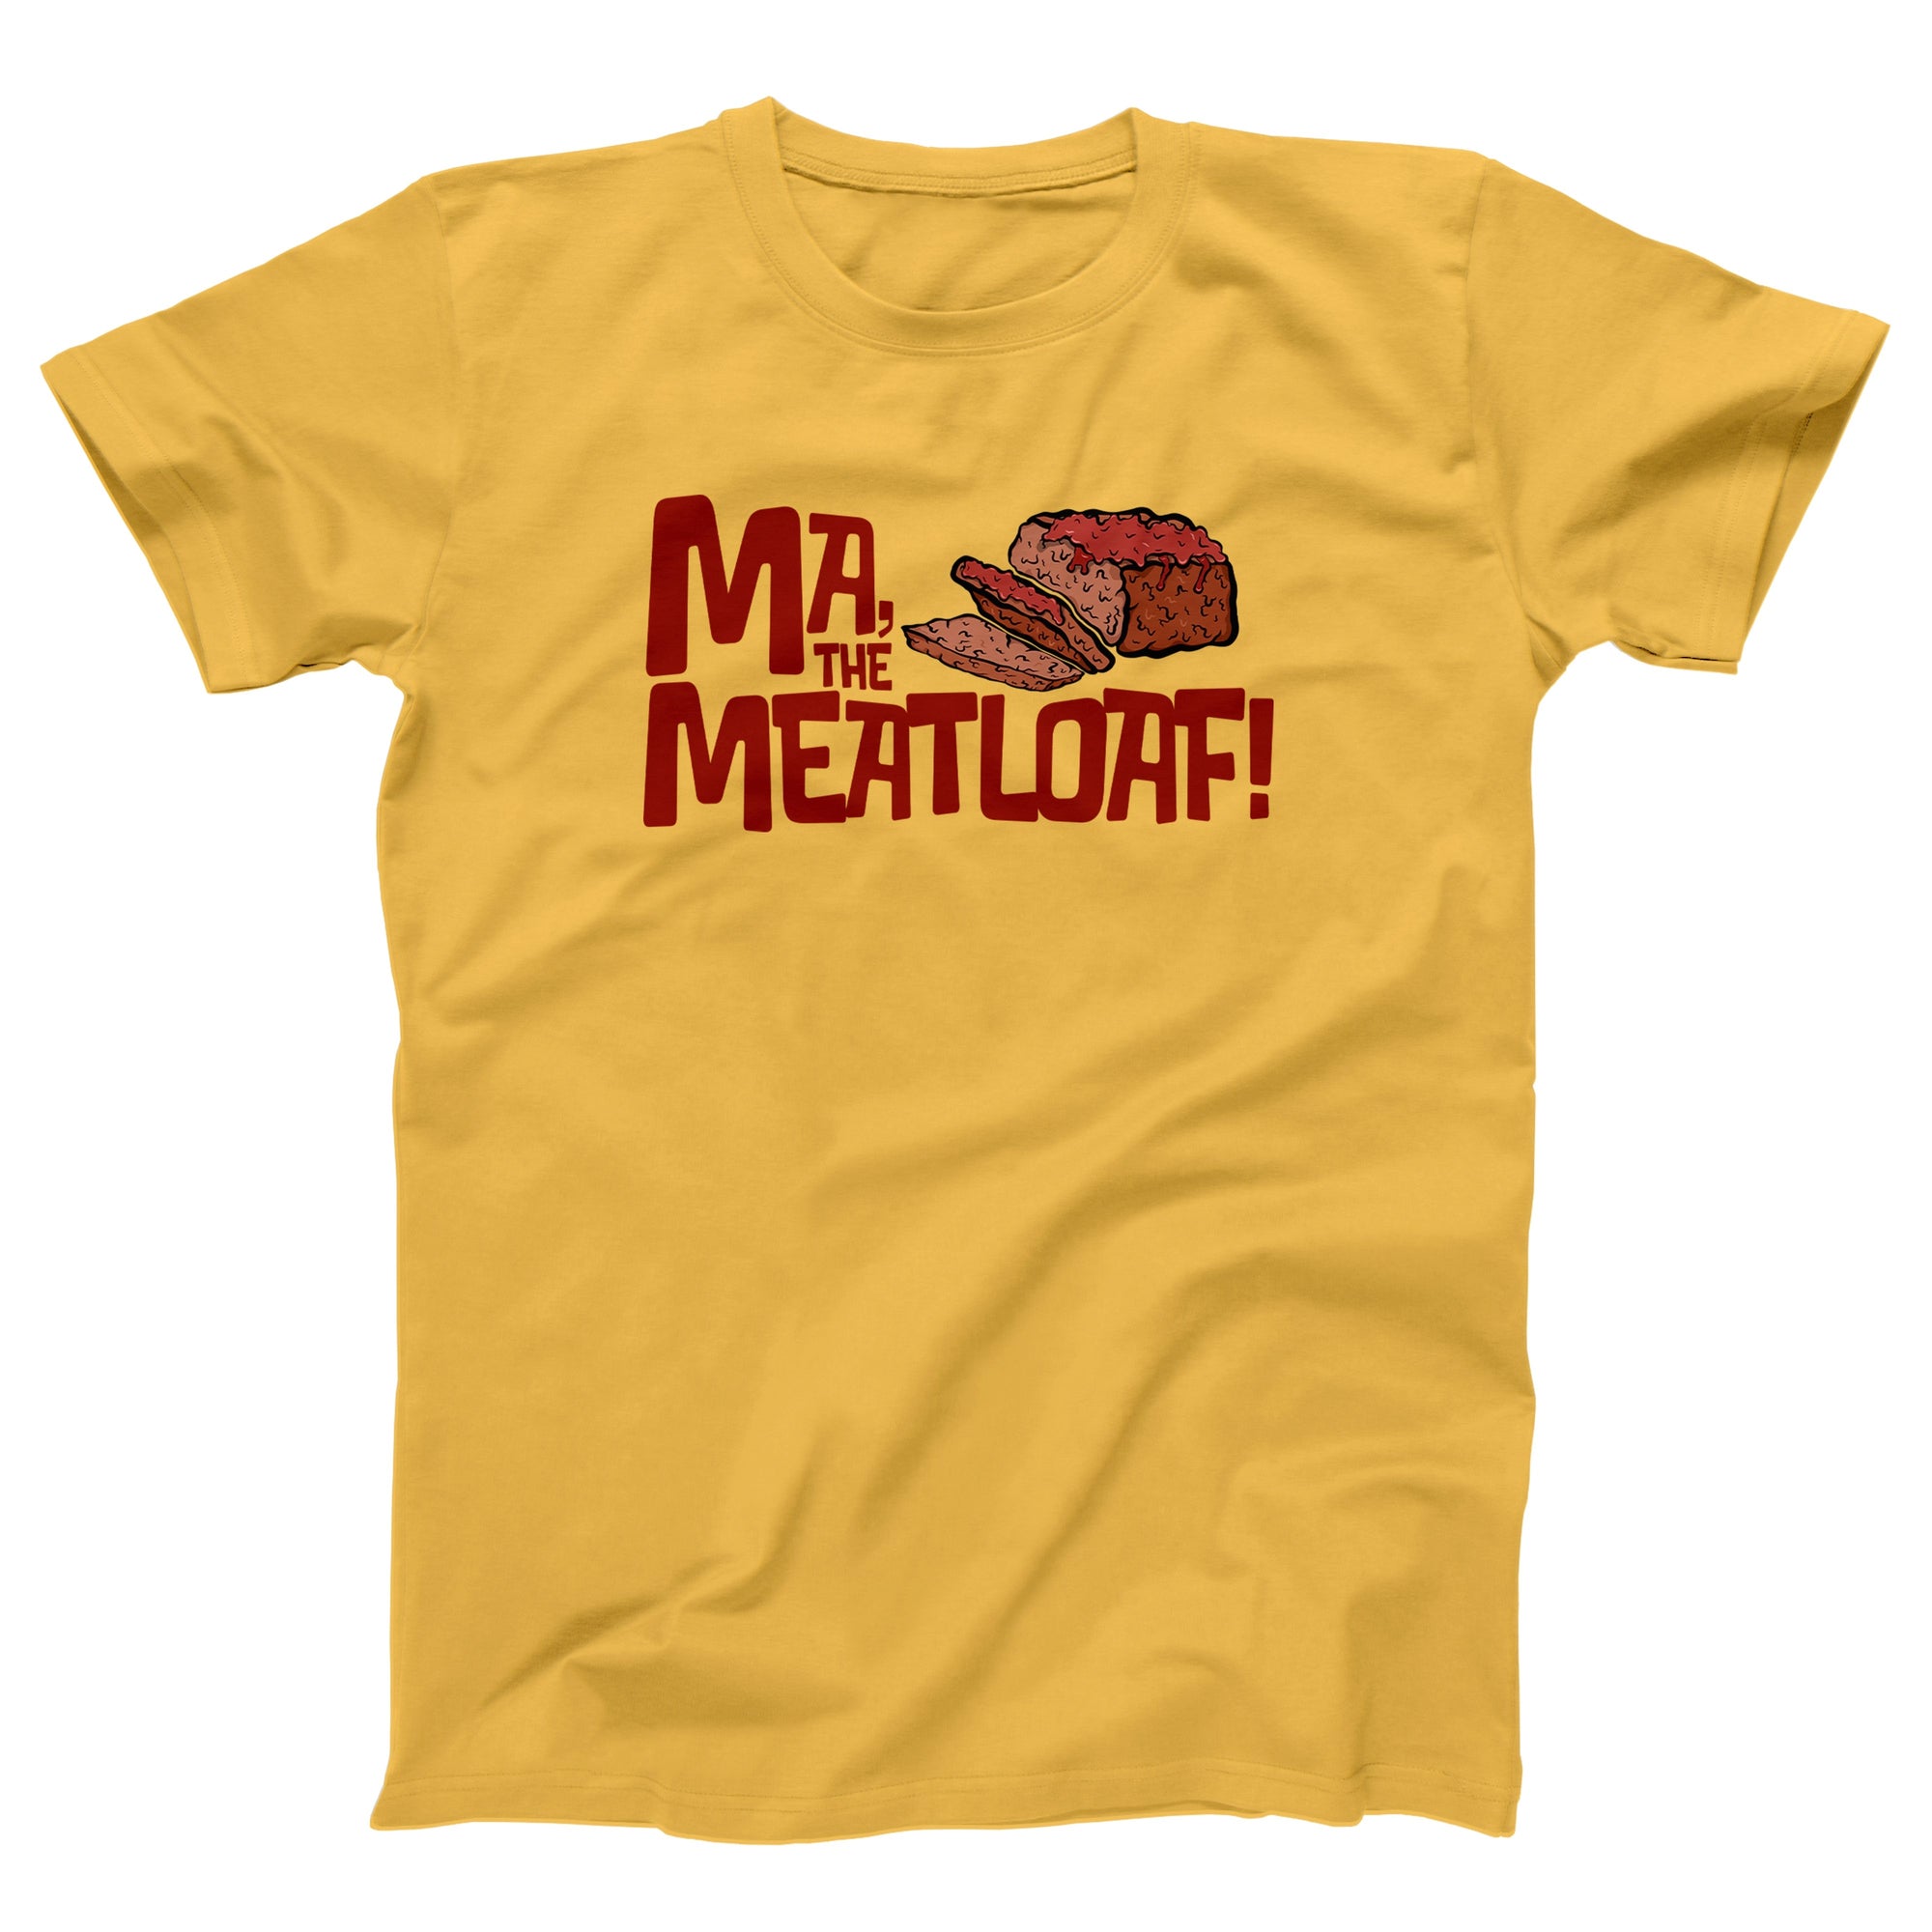 Ma, The Meatloaf Adult Unisex T-Shirt - Twisted Gorilla